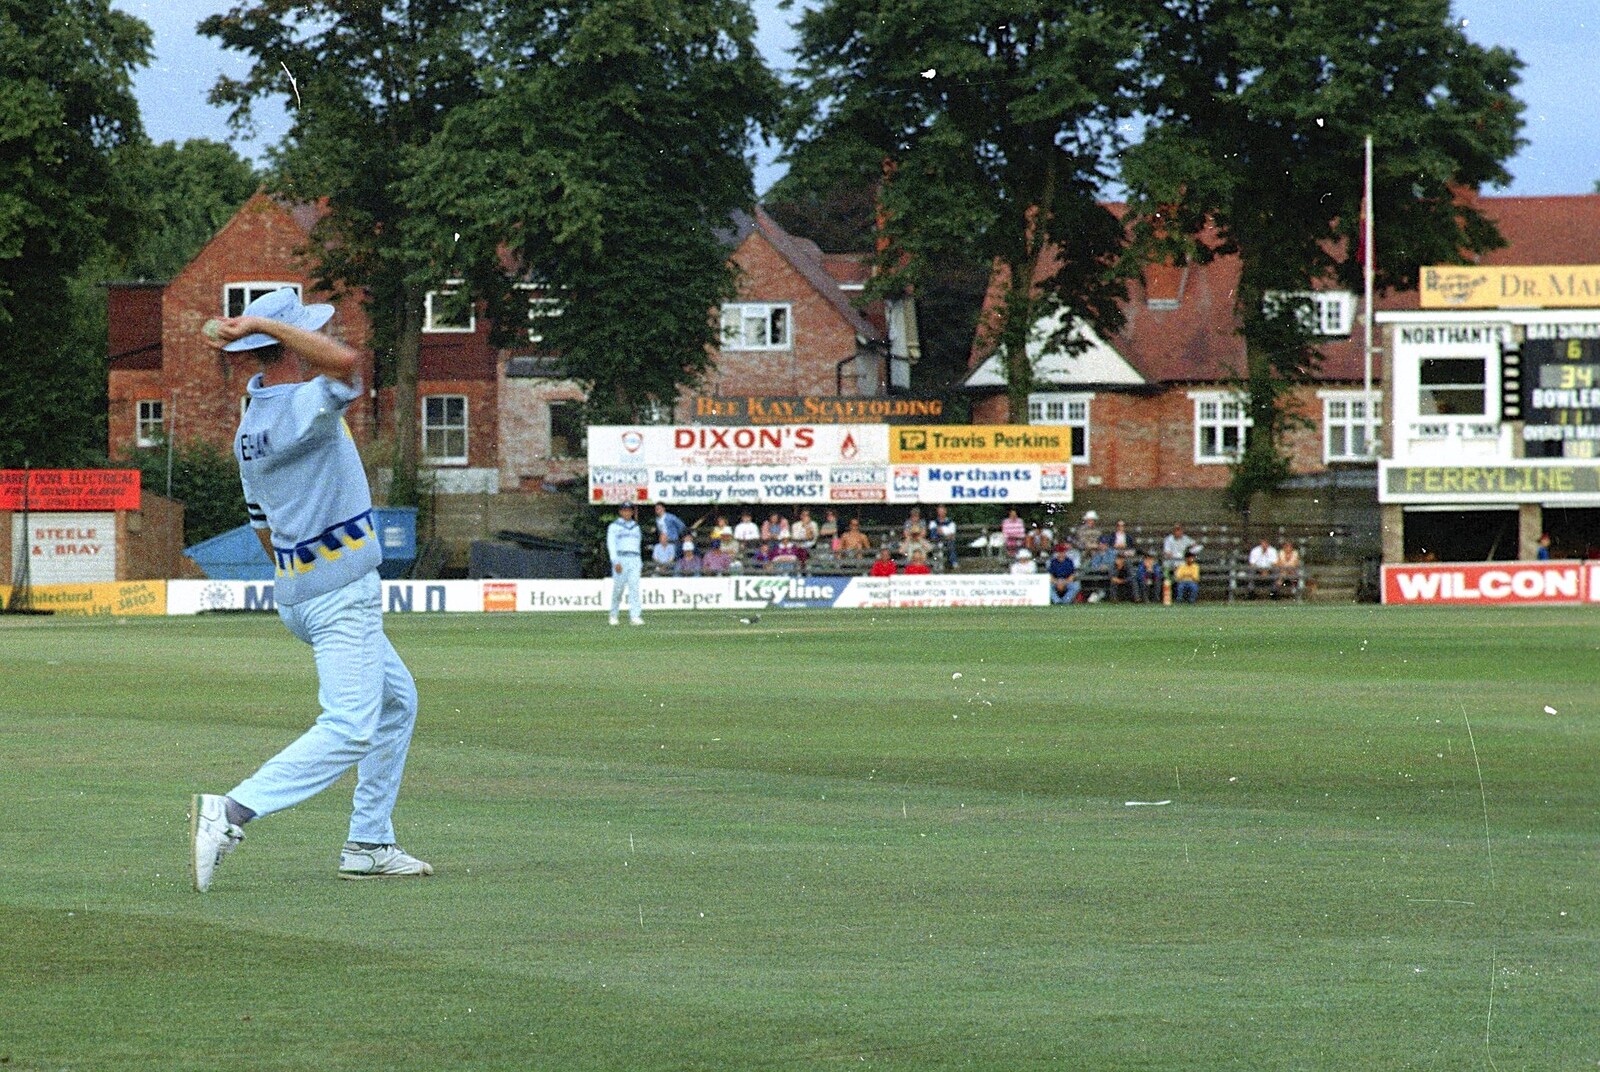 A Spot of Cricket, Northampton - 5th September 1994: More bowling